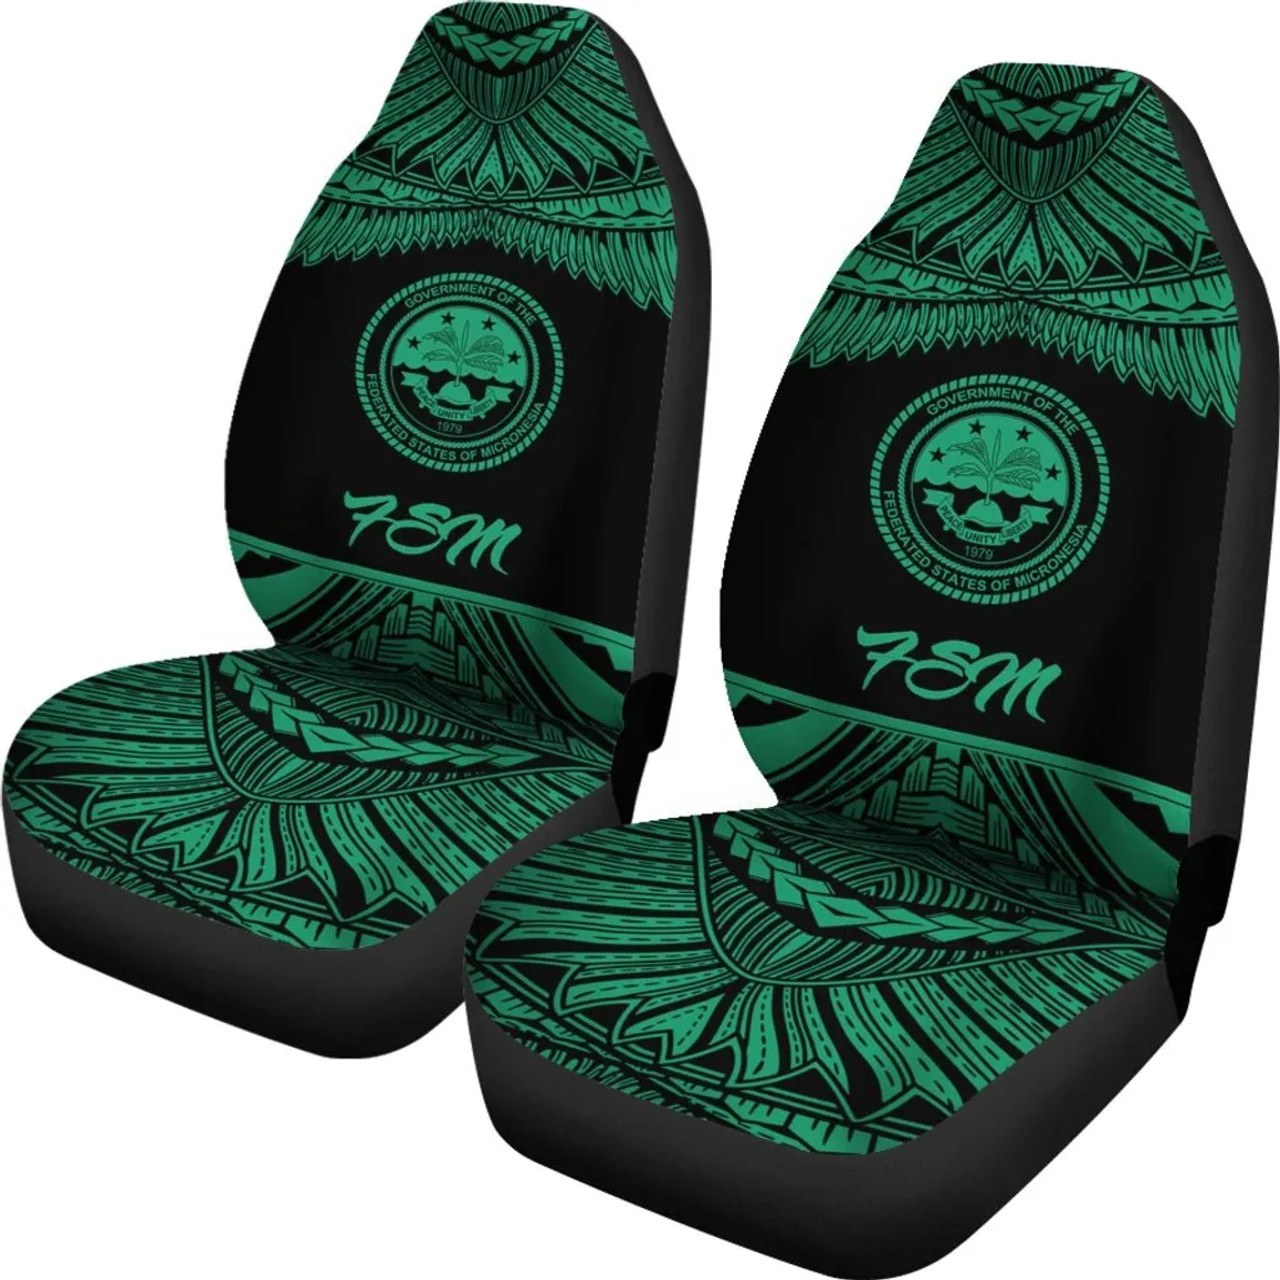 Federated States Of Micronesia Polynesian Car Seat Covers - Pride Green Version